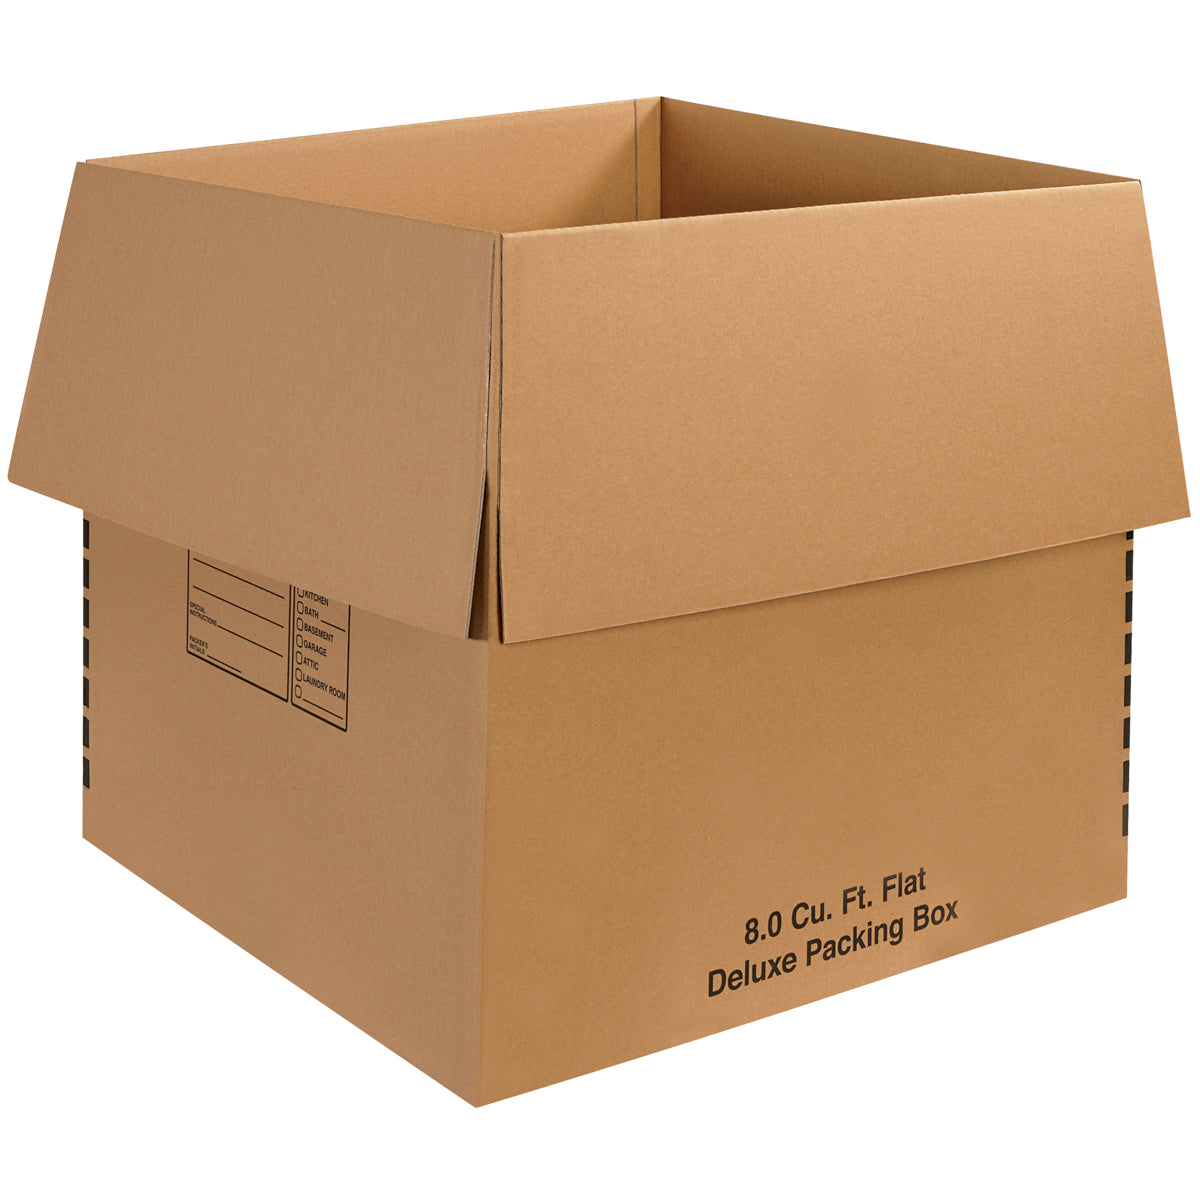 24 X 24 X 24 Deluxe Packing Boxes